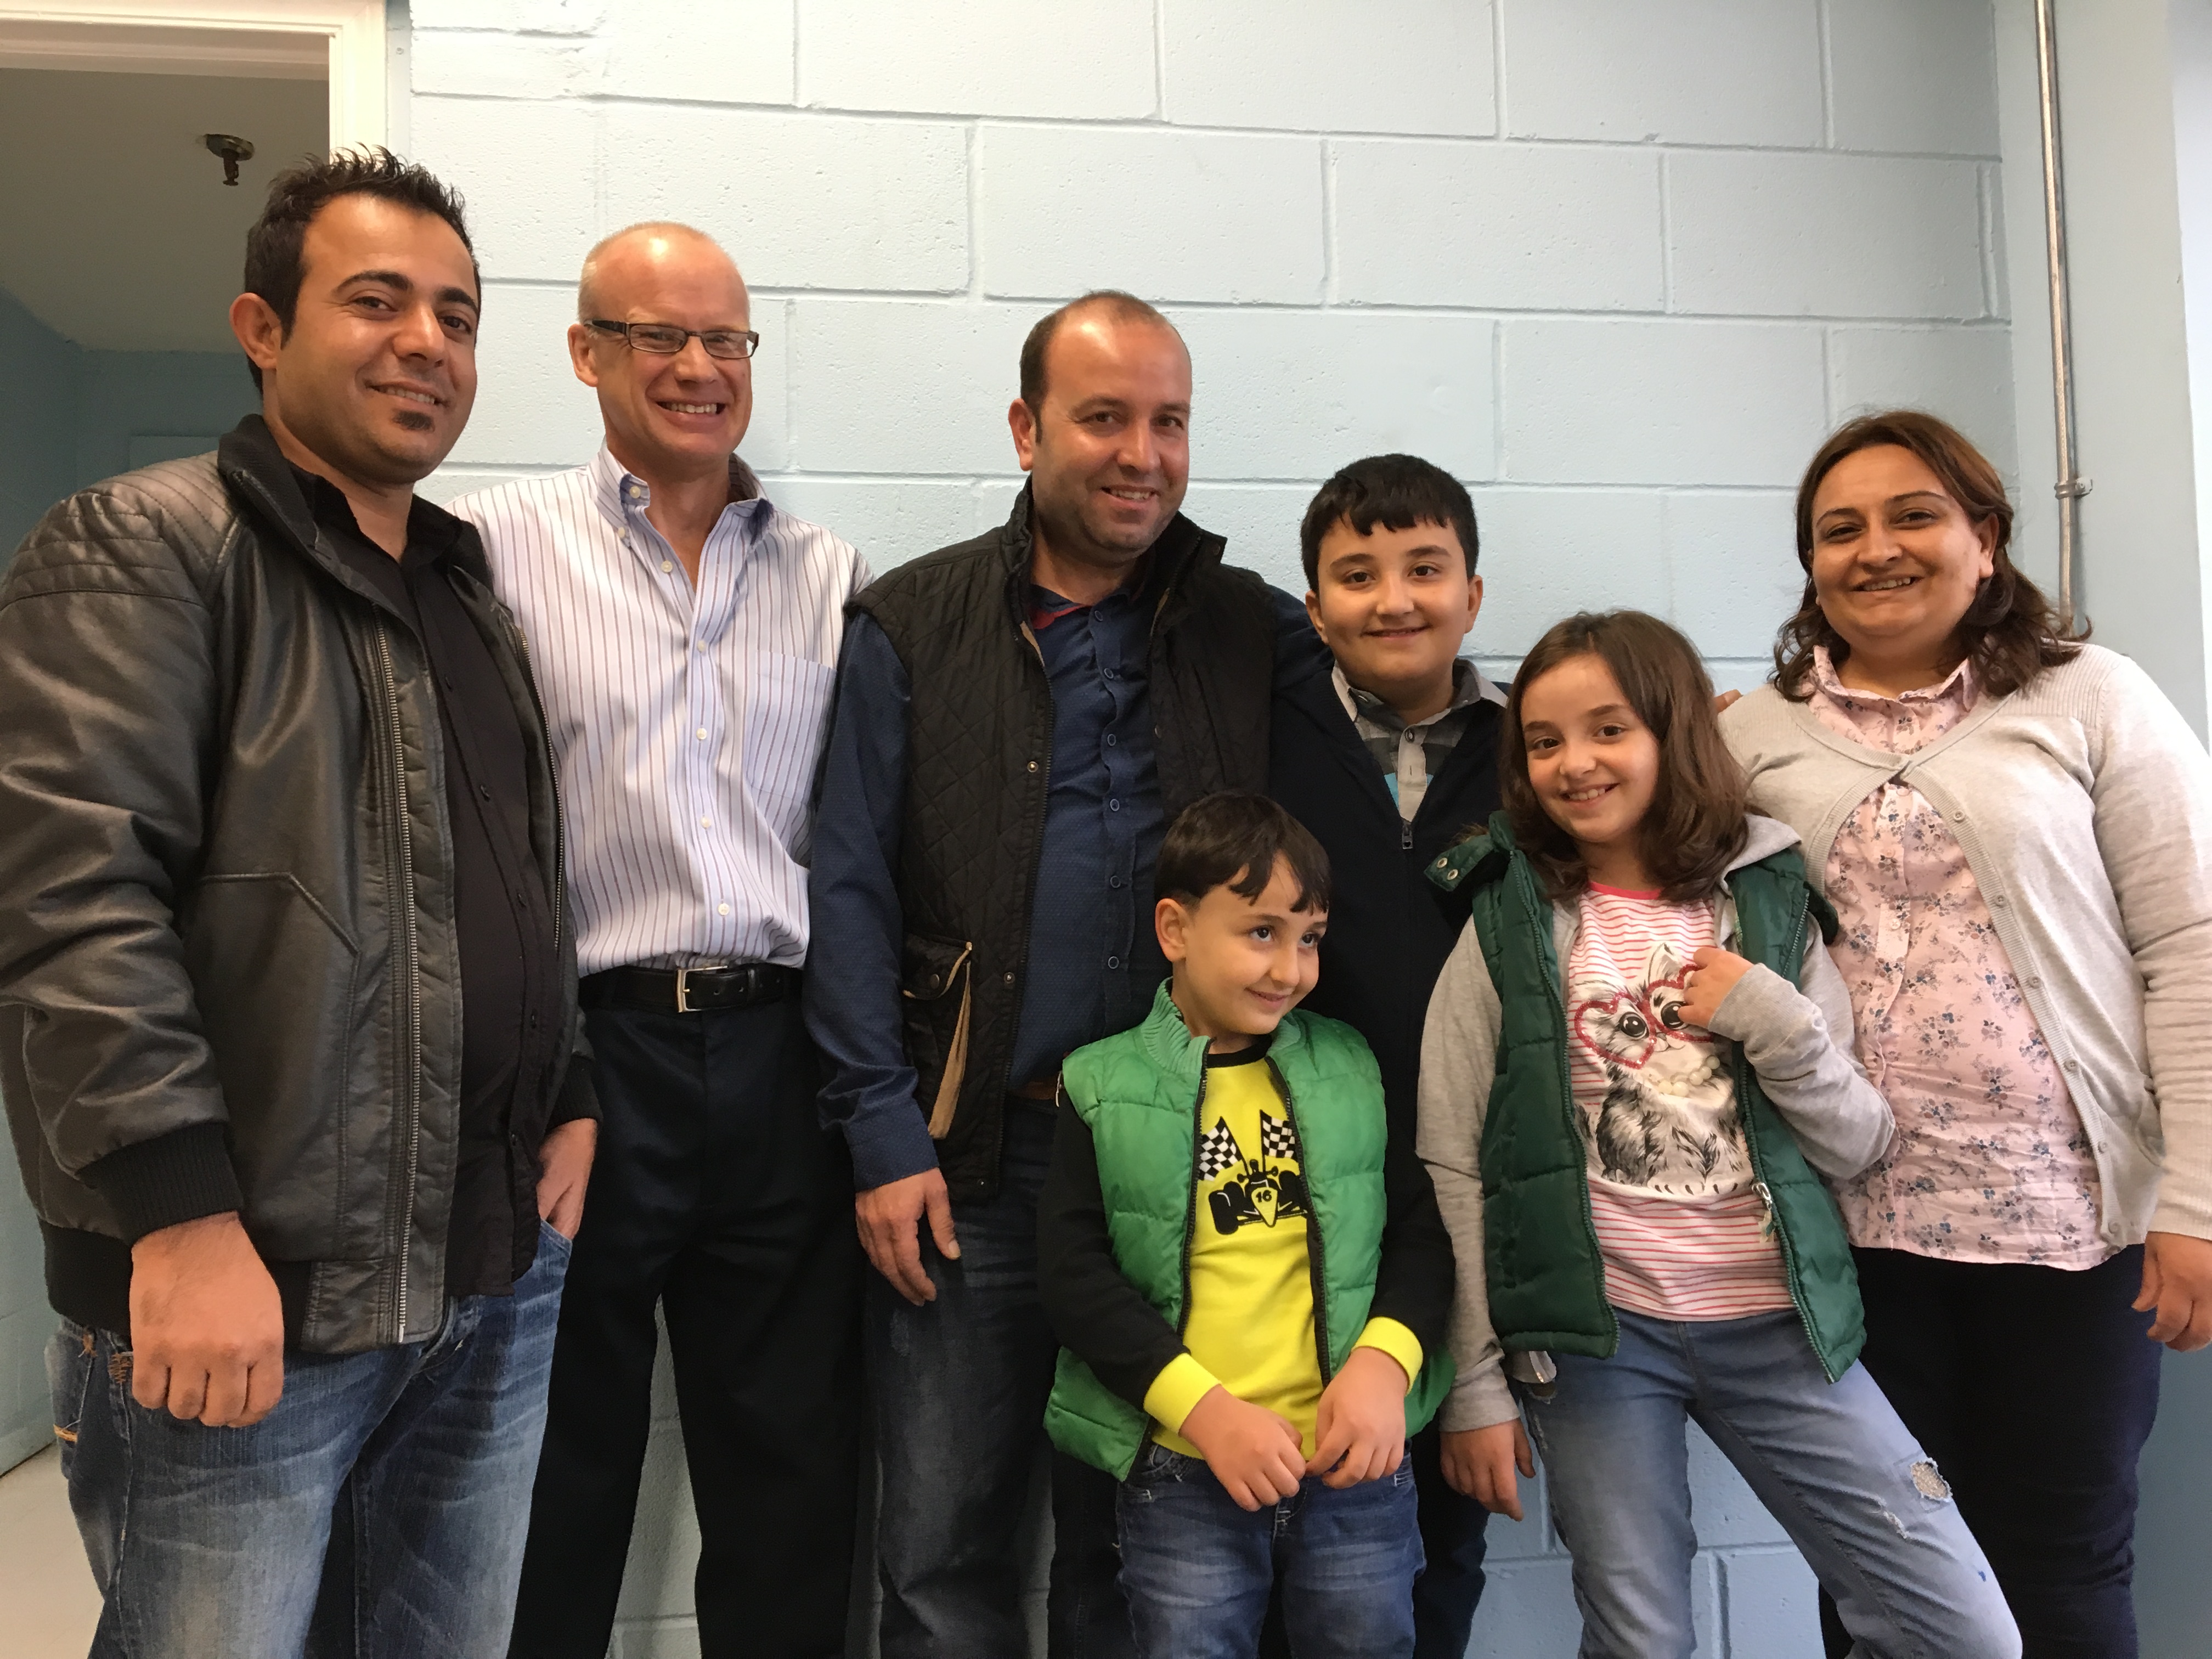 From left: Interpreter John Jowin, David Hobson, Halil Dudu, his children Muhammed, 7; Azad, 11; and Simaf, 9; and his wife Emine